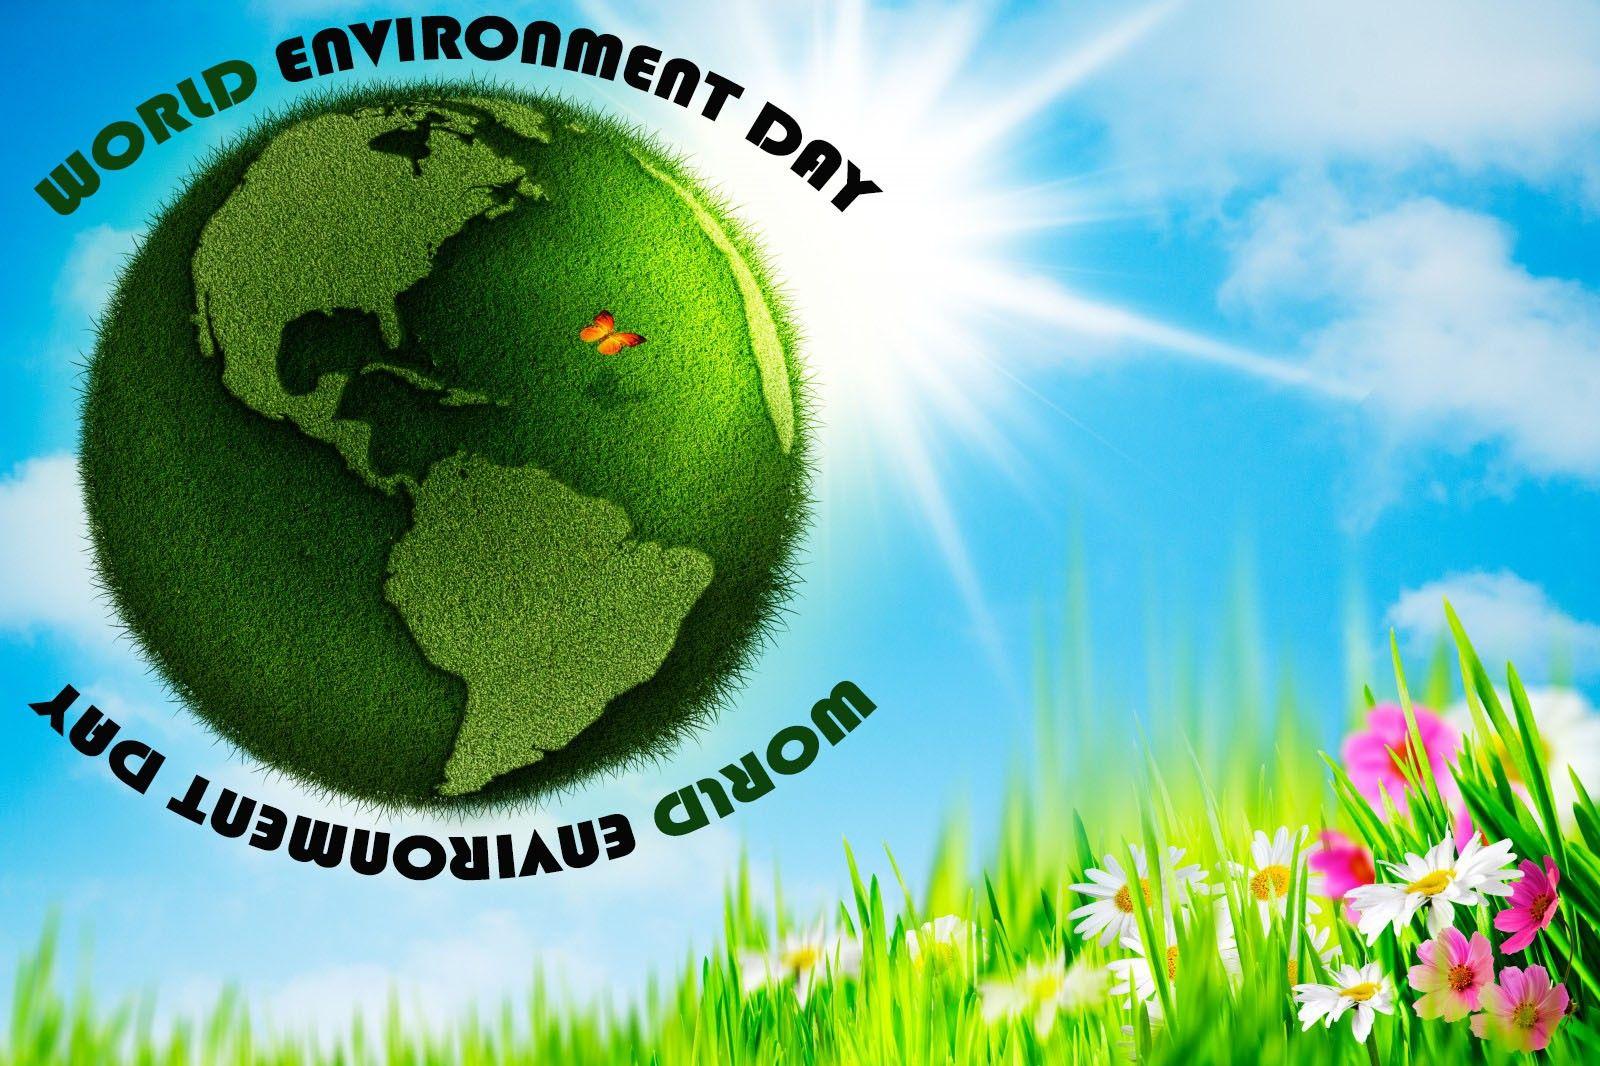 Earth Day Wallpaper Free Download